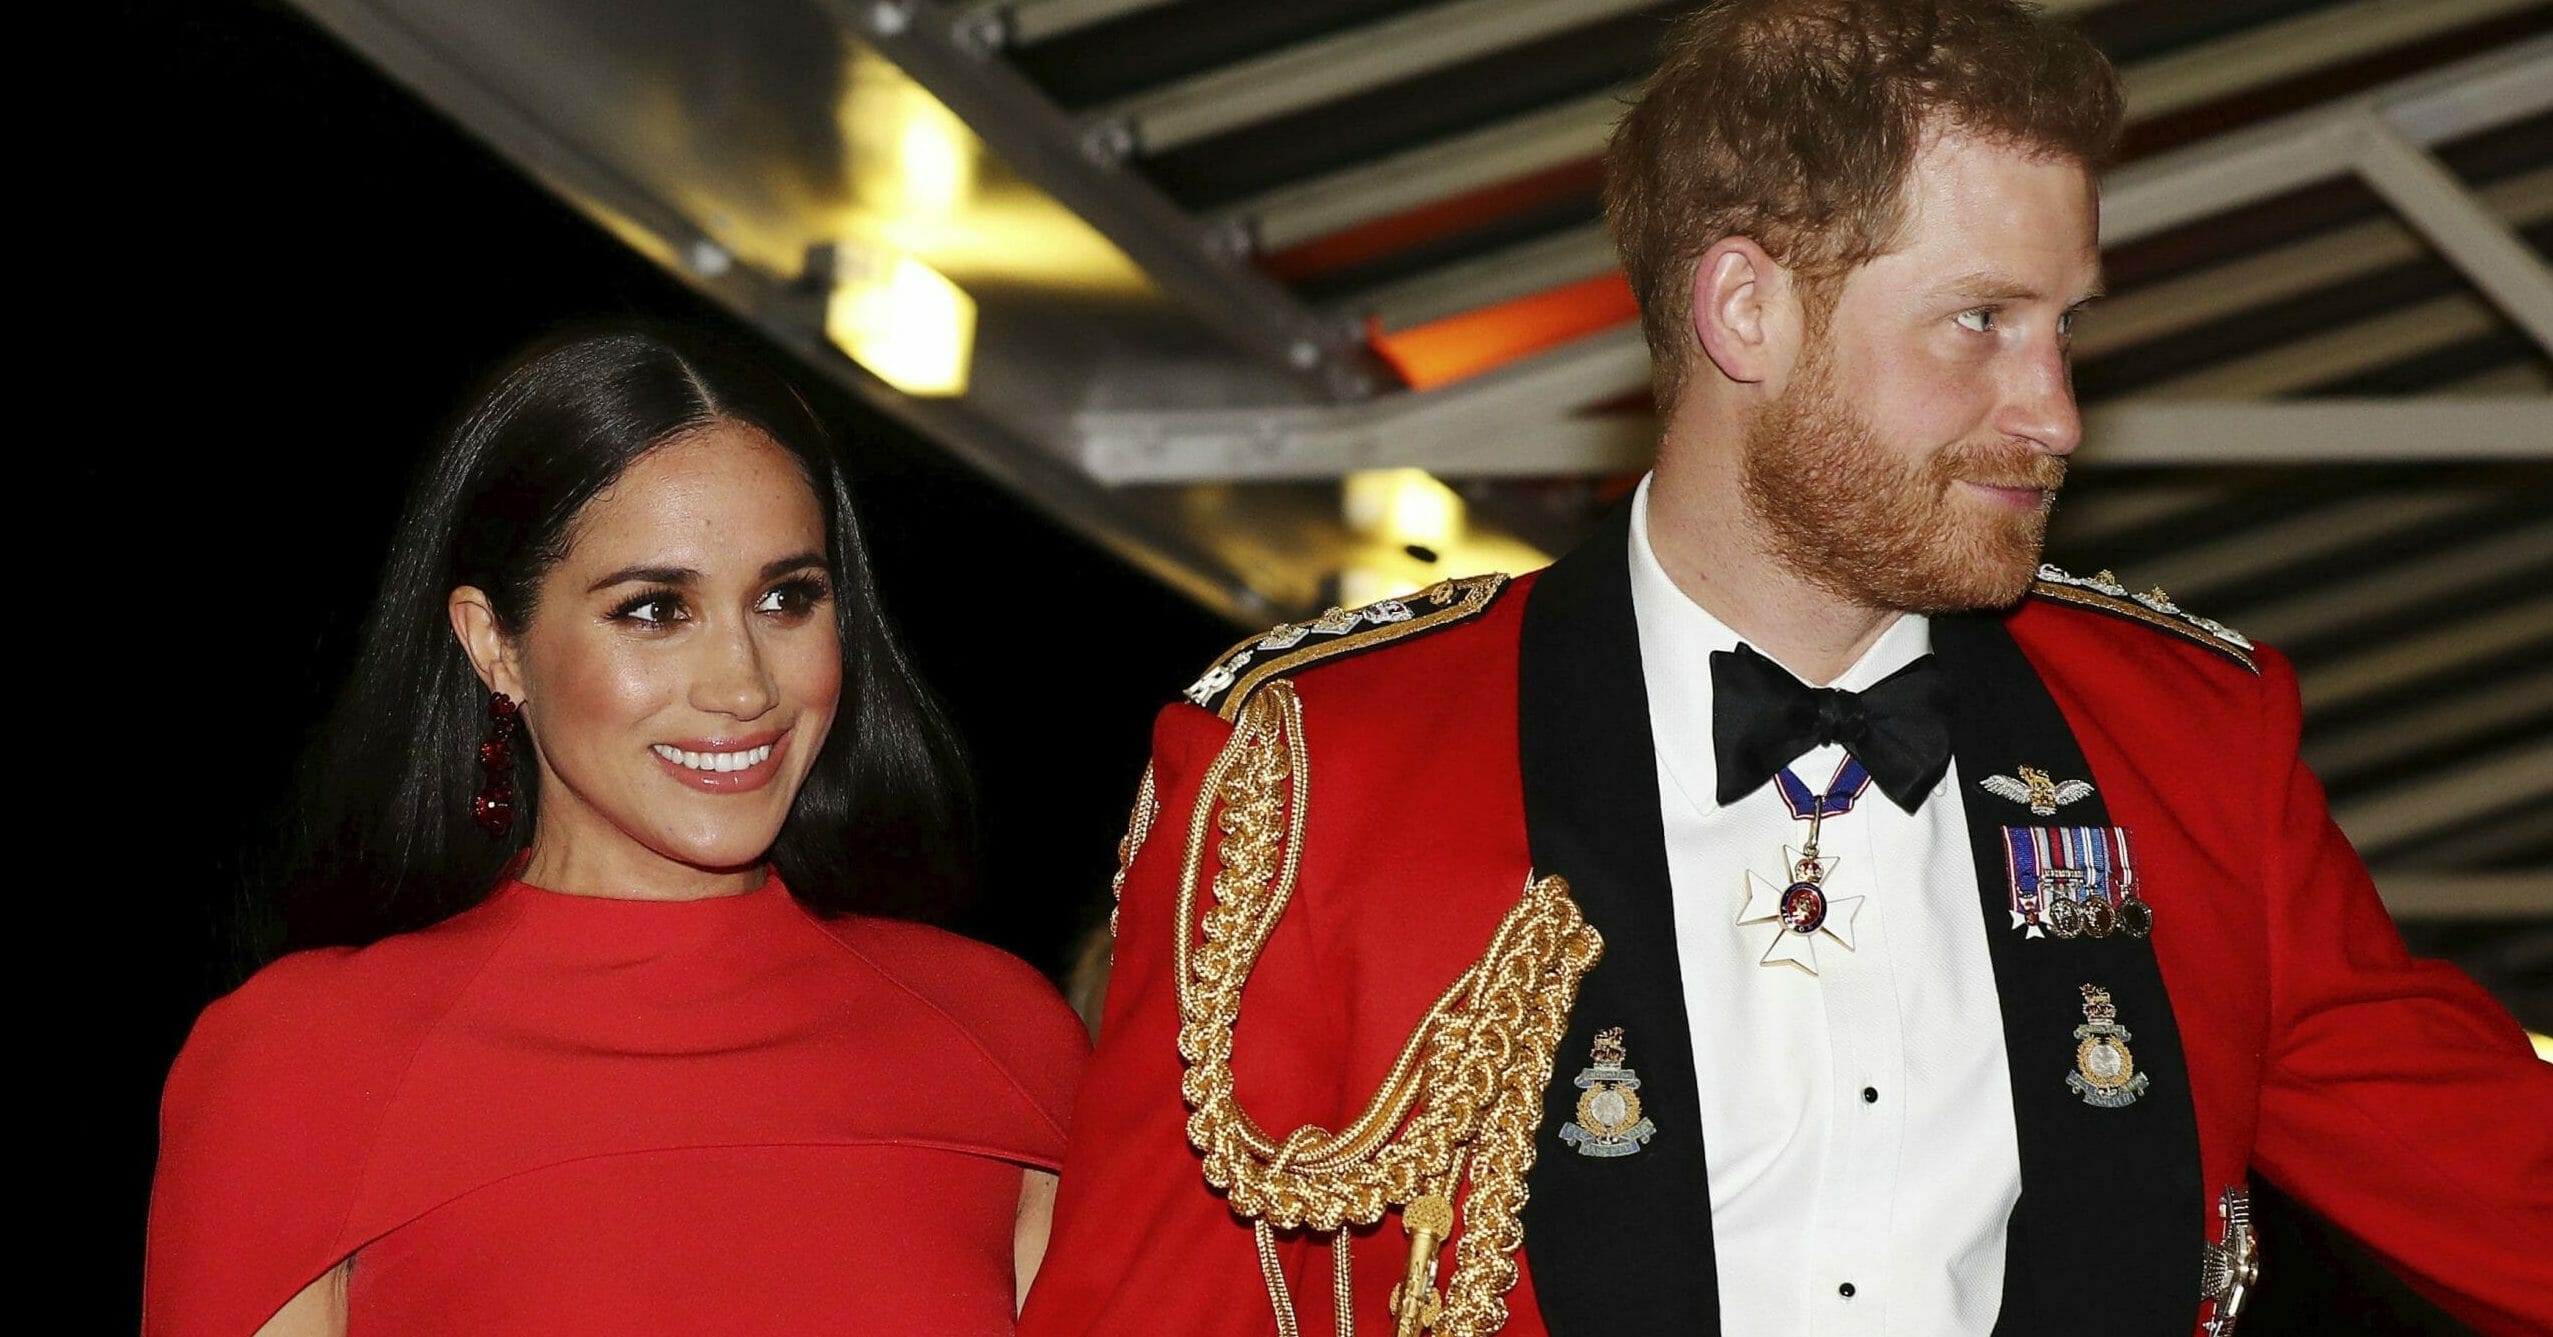 Britain's Prince Harry and wife Meghan, Dutchess of Sussex, arrive at the Royal Albert Hall in London on March 7, 2020.